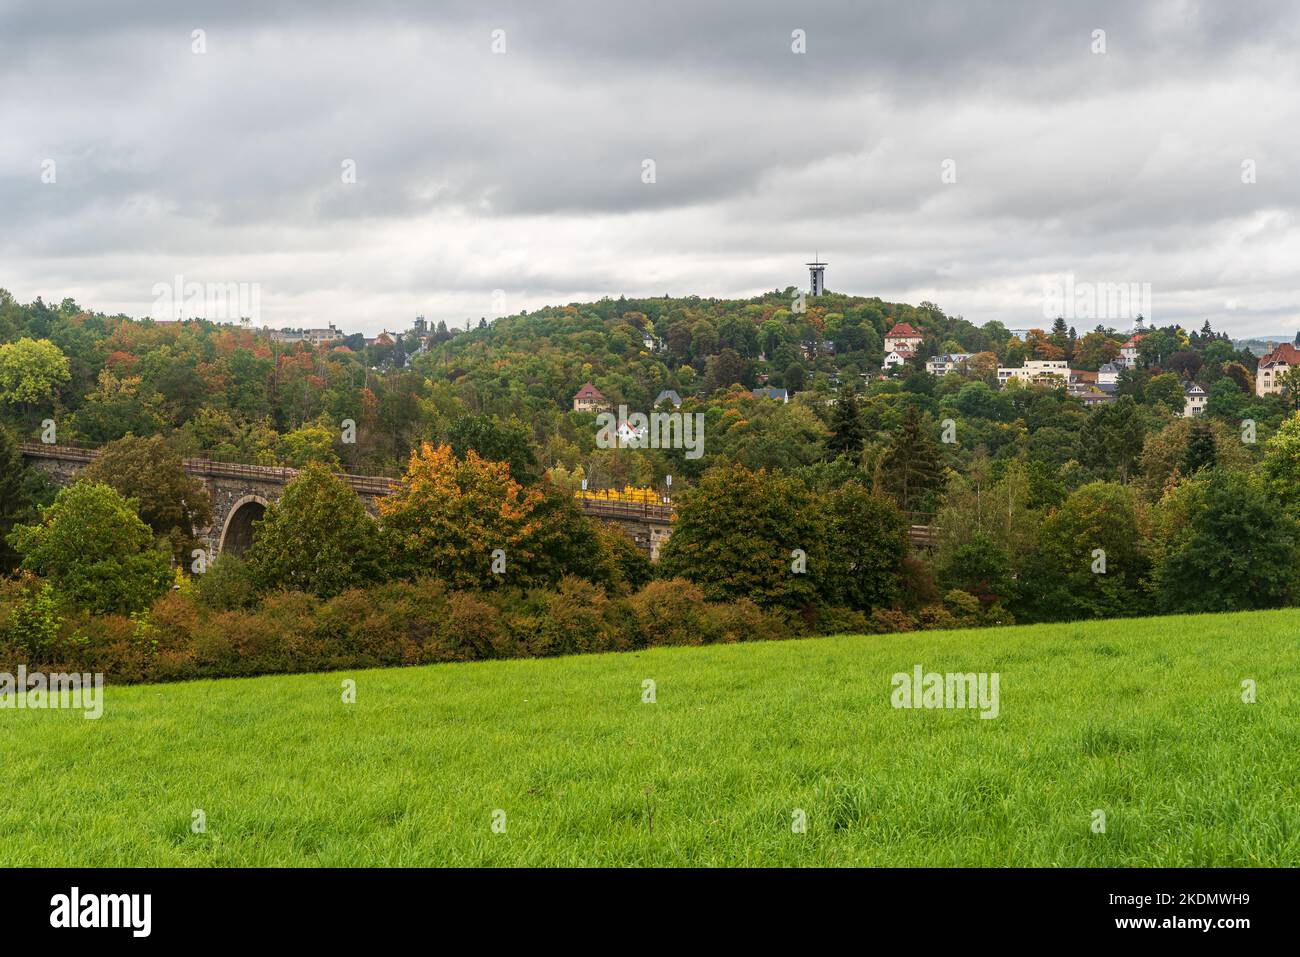 Syratalbrucke bridge and Barenstein hill with lookout tower in Plauen city in Germany during autumn Stock Photo